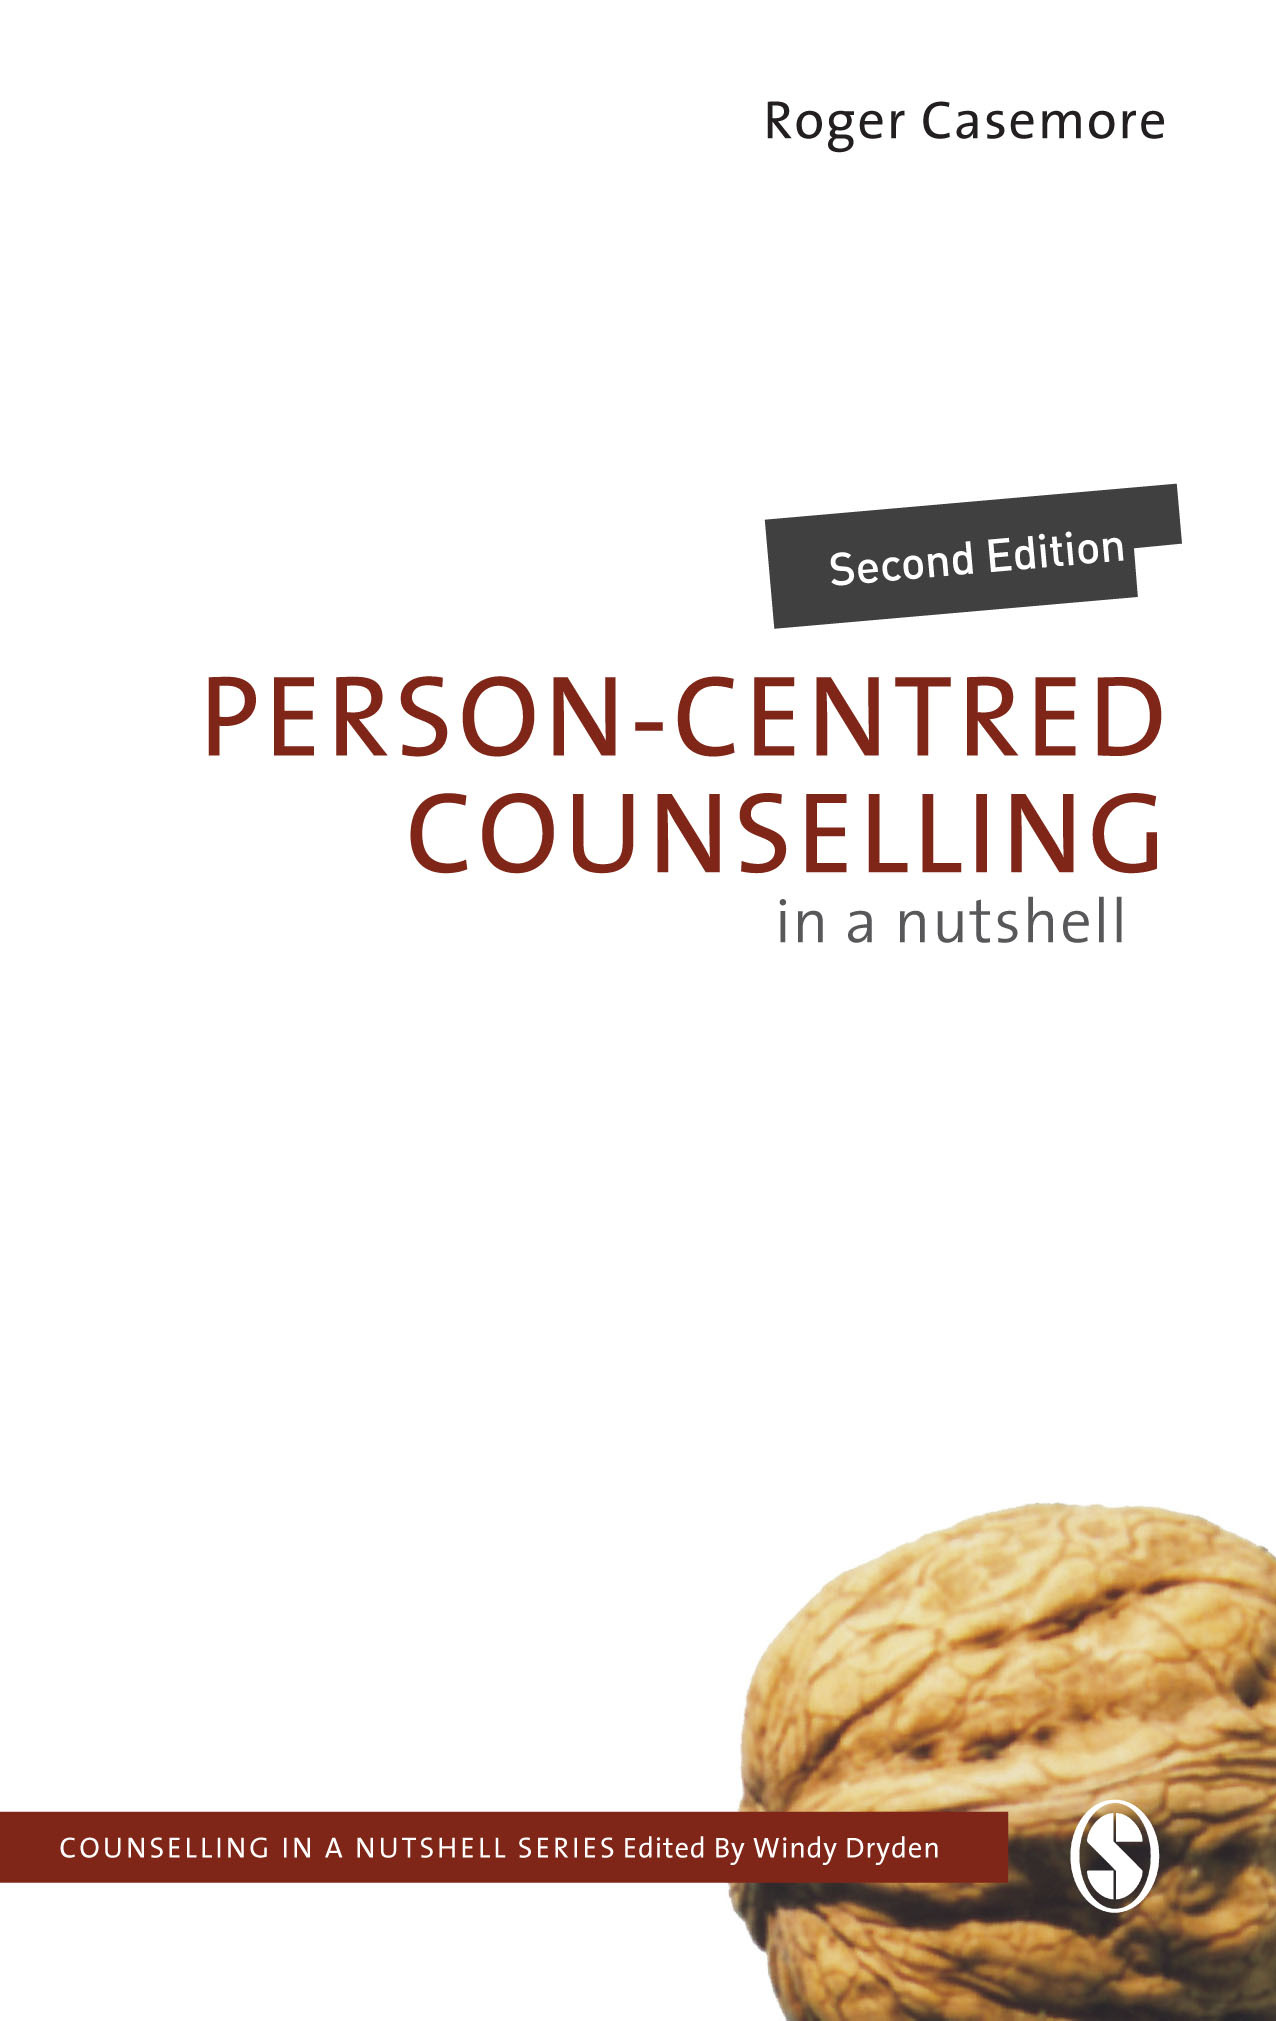 Person-Centred Counselling in a Nutshell book cover image 